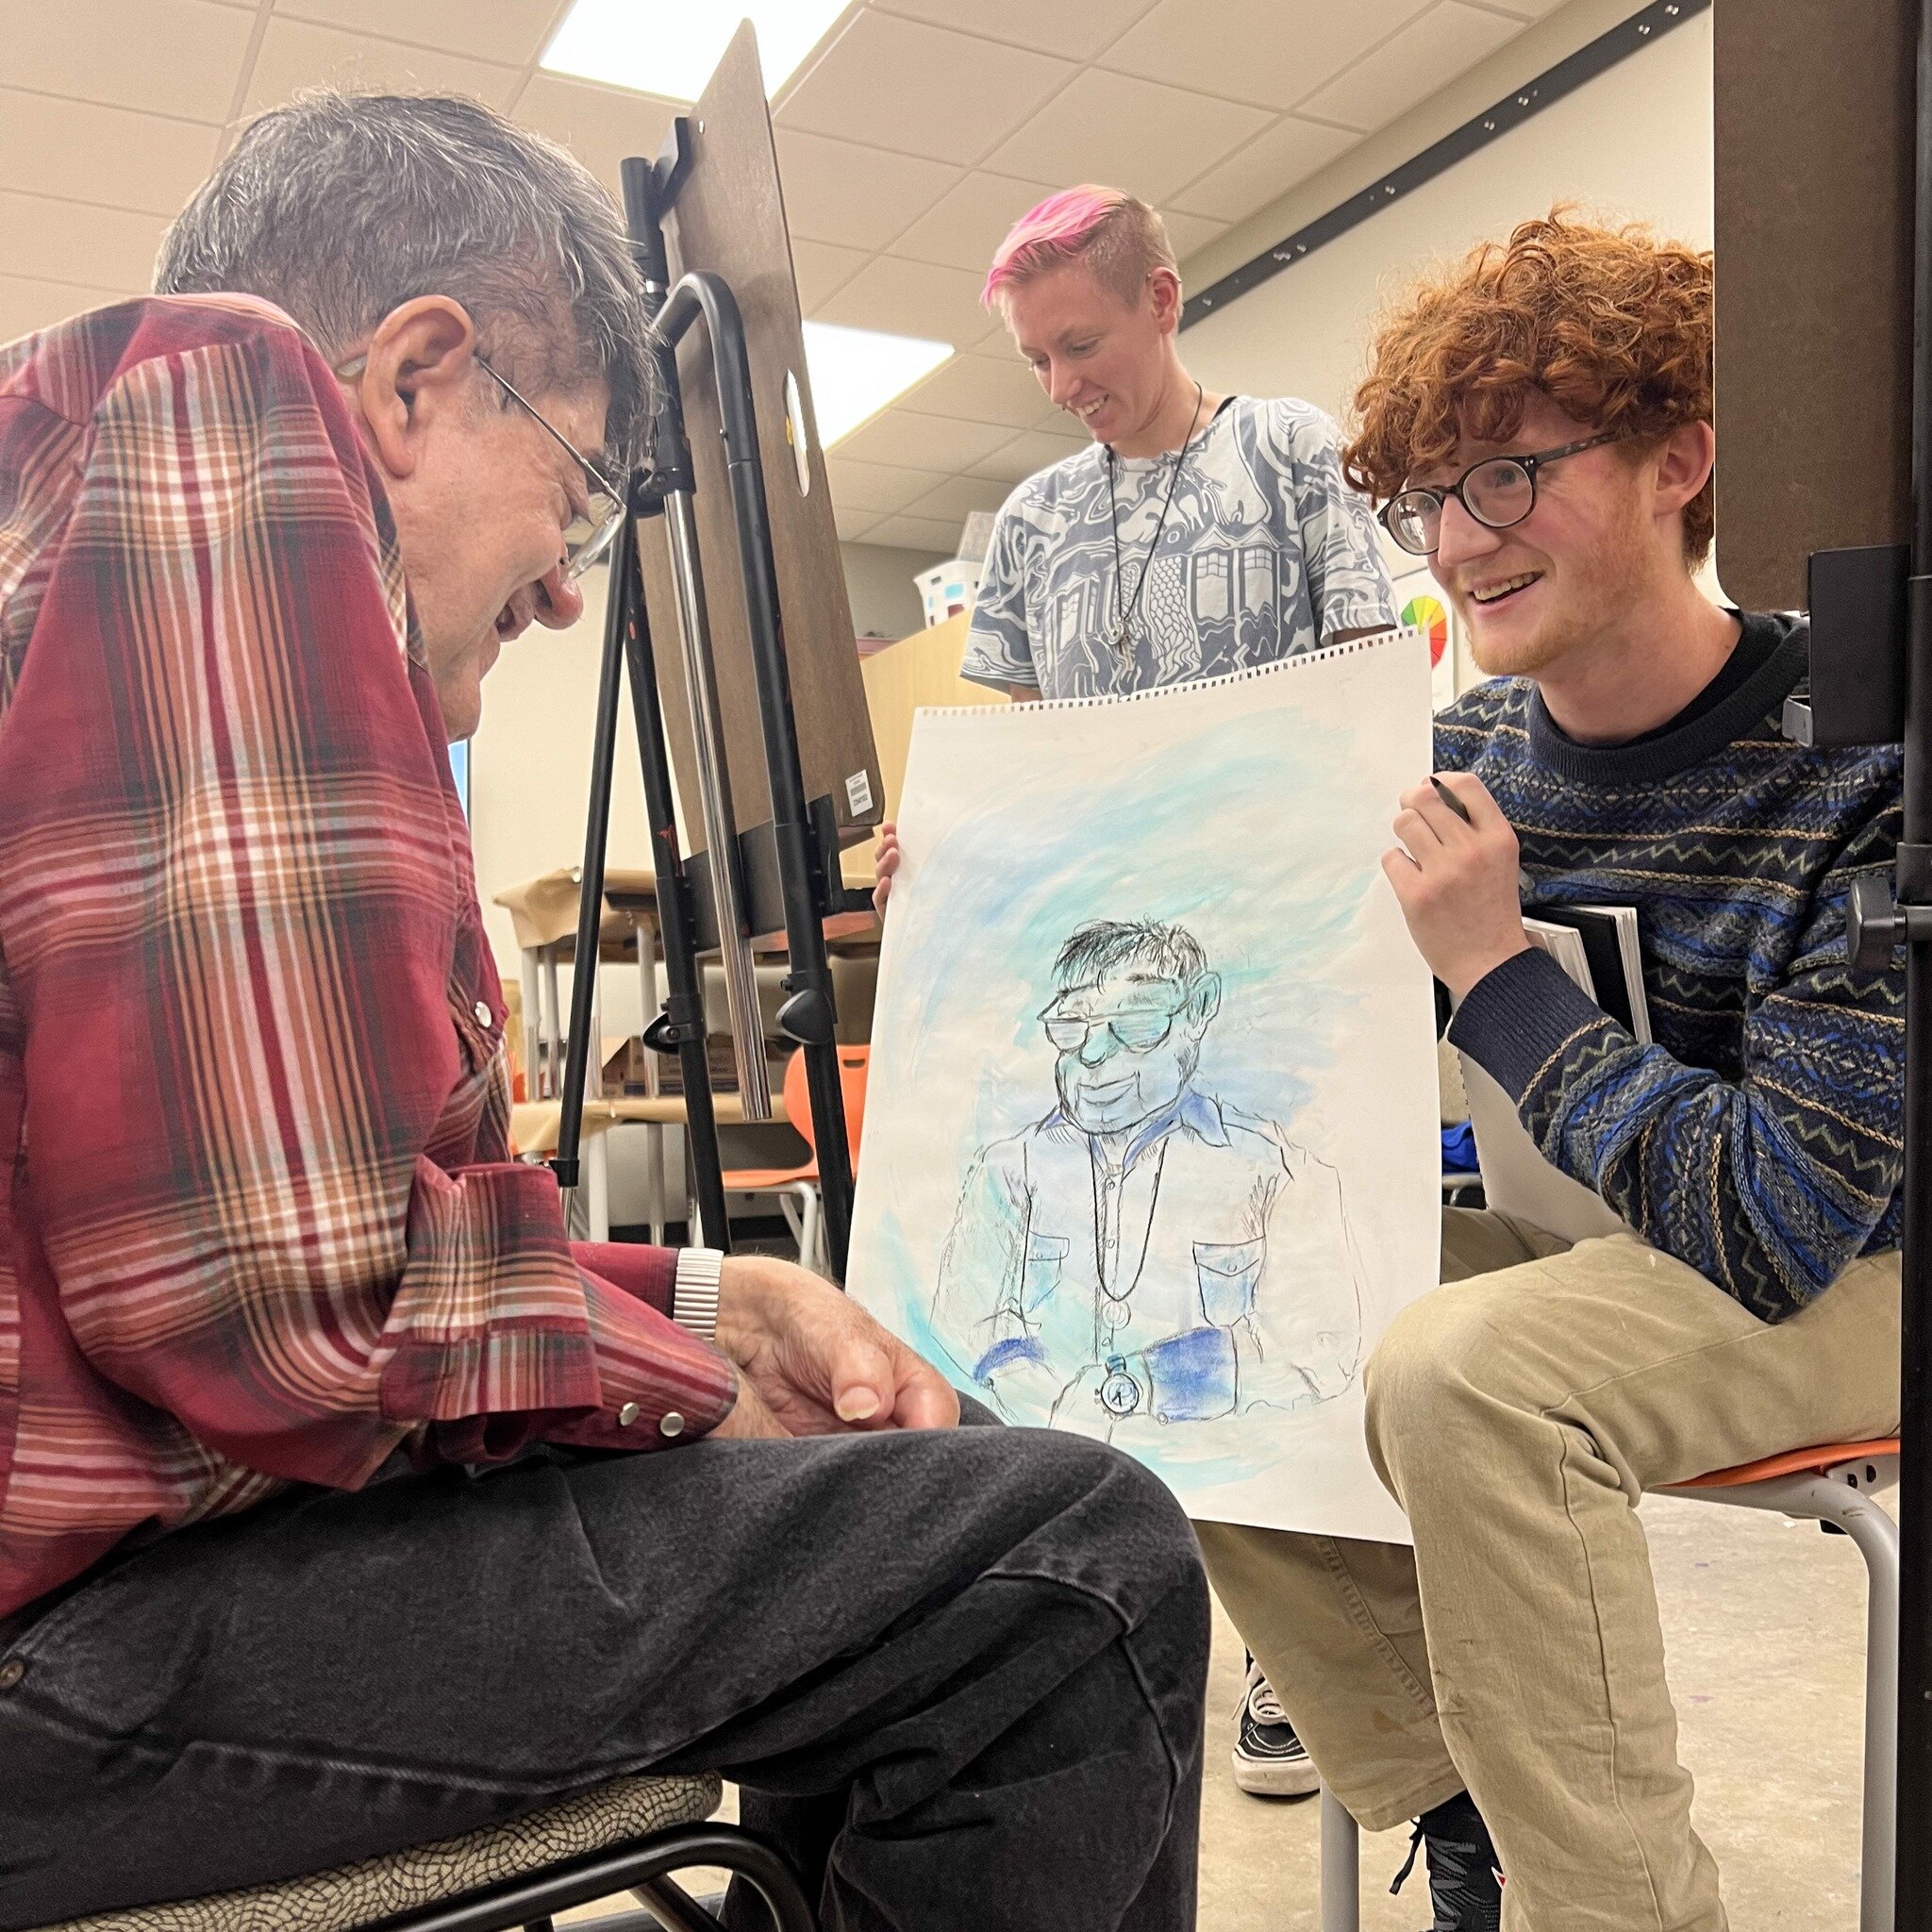 Captured moments of connection in a collaboration of Amarillo College art students and Jan Werner Adult Day Care. Thank you sweet seniors for sharing your stories and spreading your happiness! 
#amarillomuseumofart